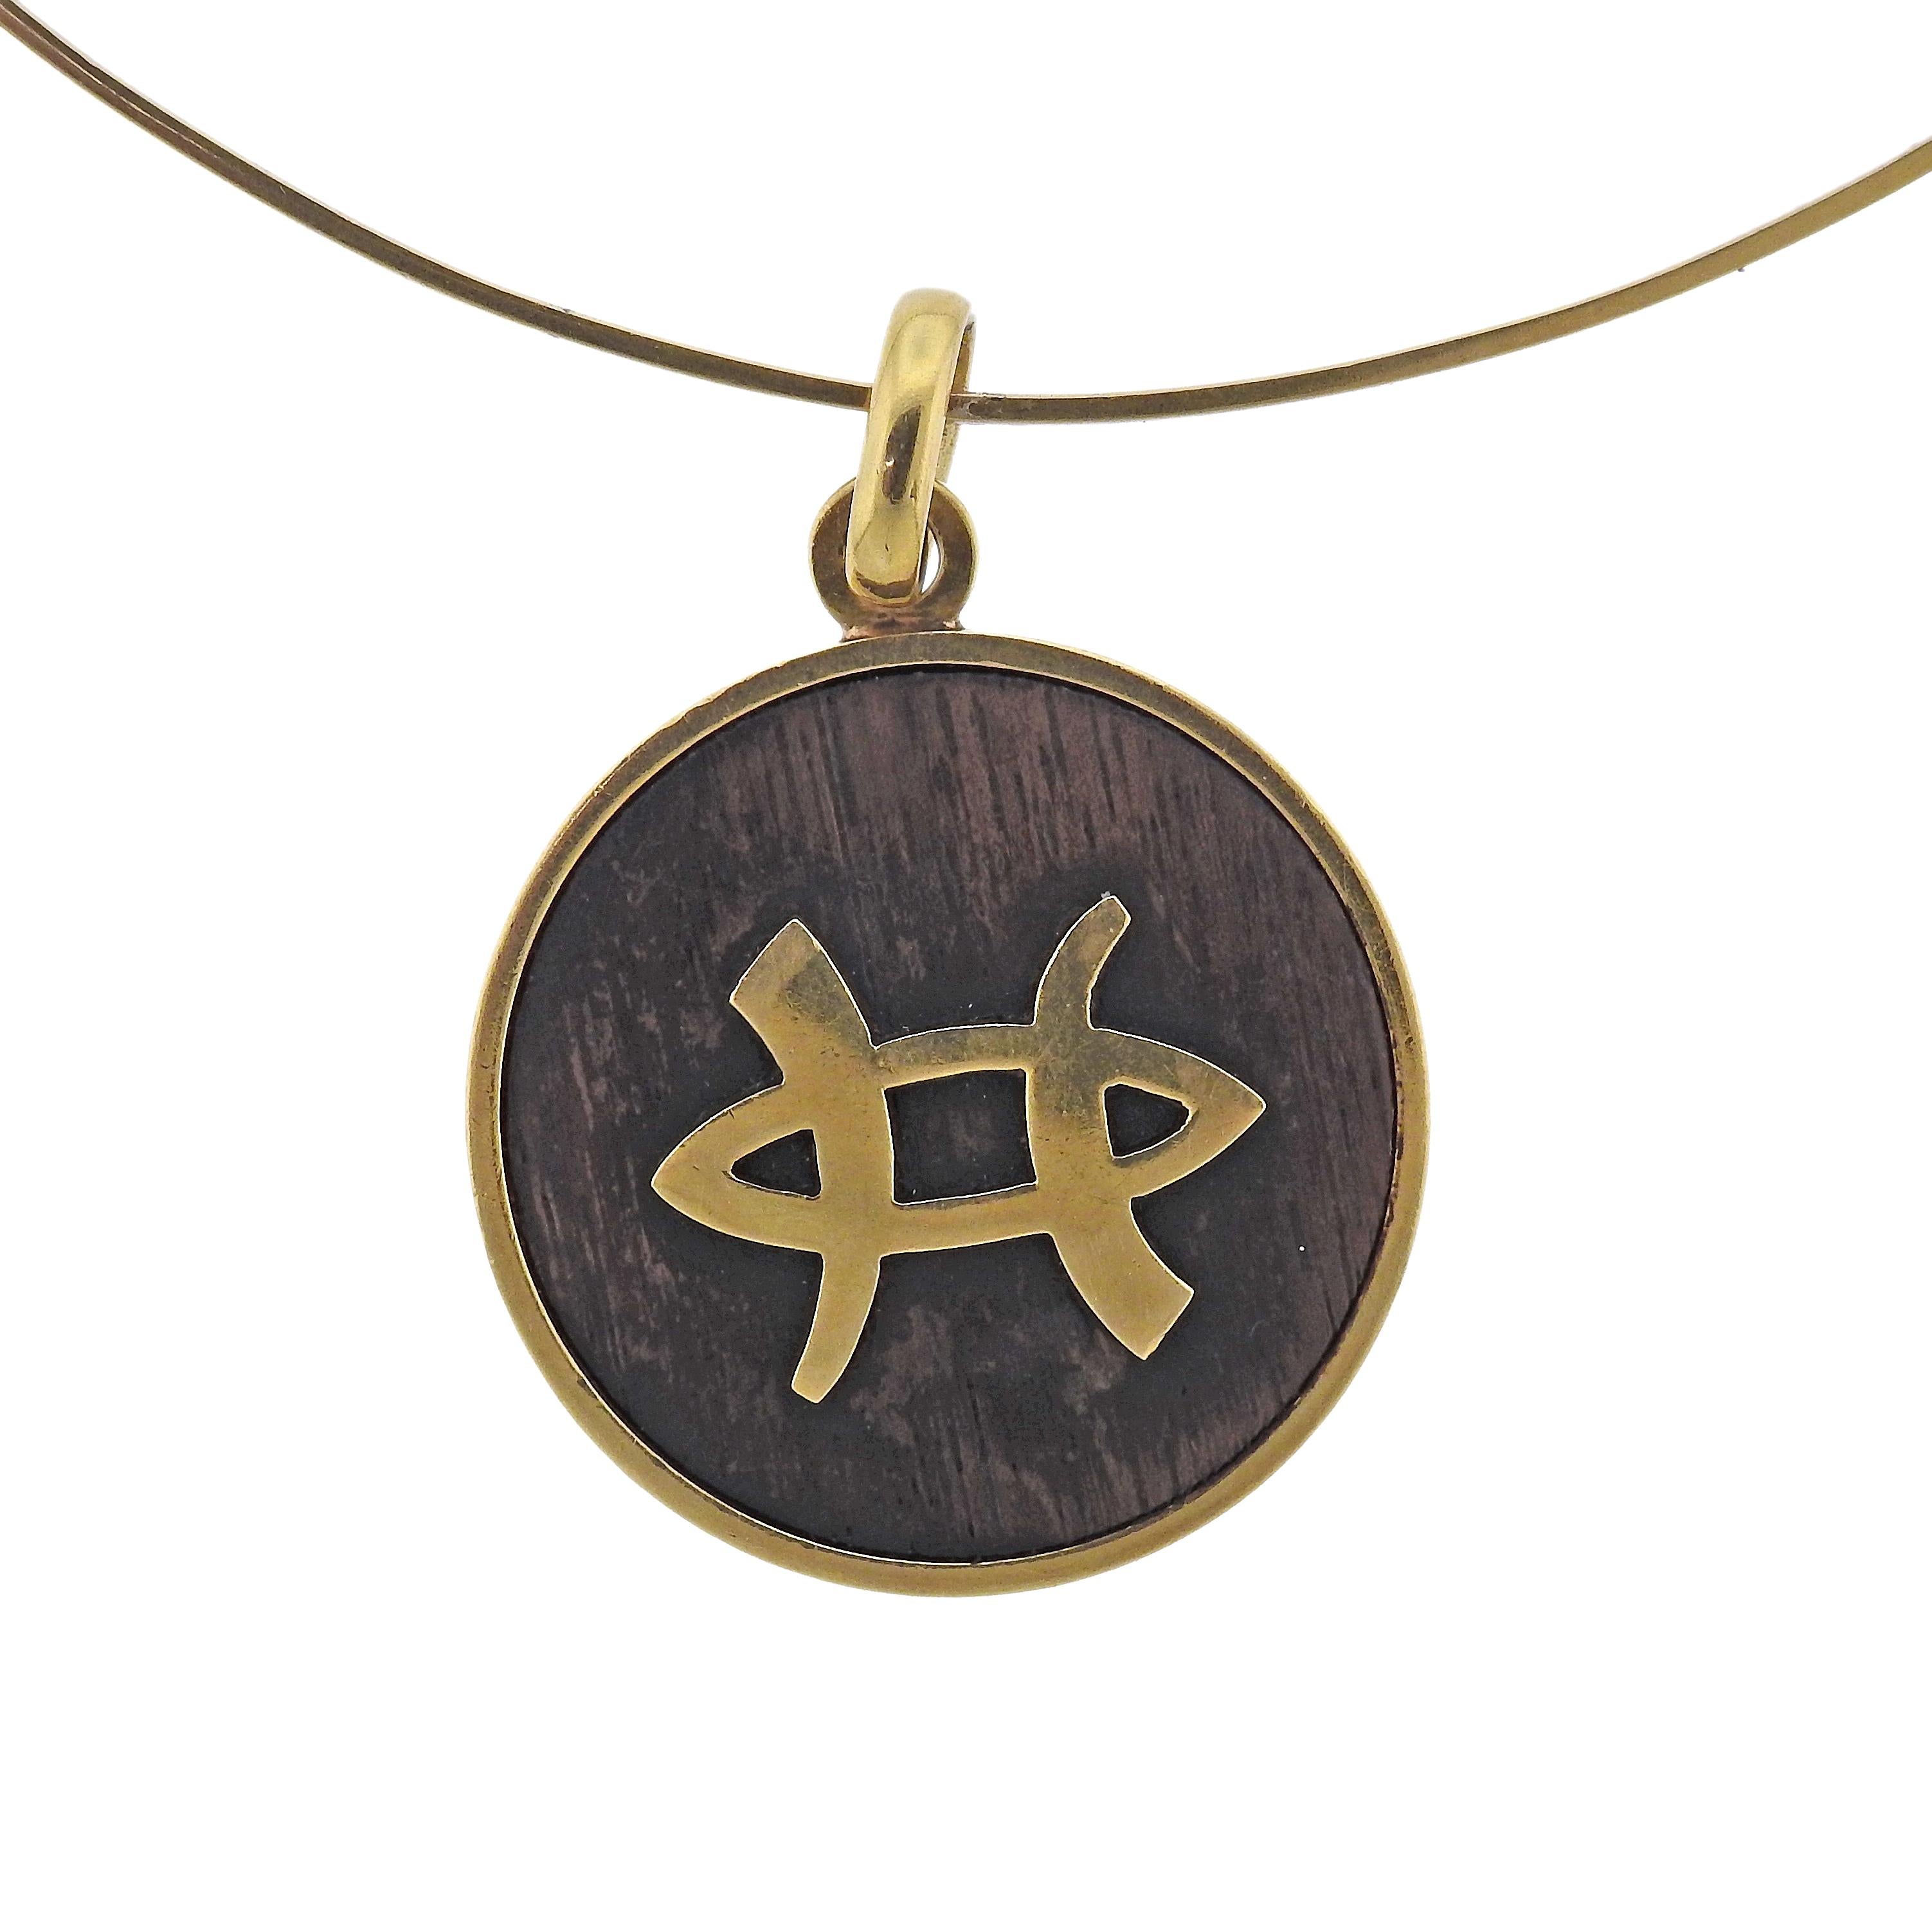 1970s vintage 18k gold necklace with pendant, set with wood, depicting Pisces Zodiac sign. Necklace is 16